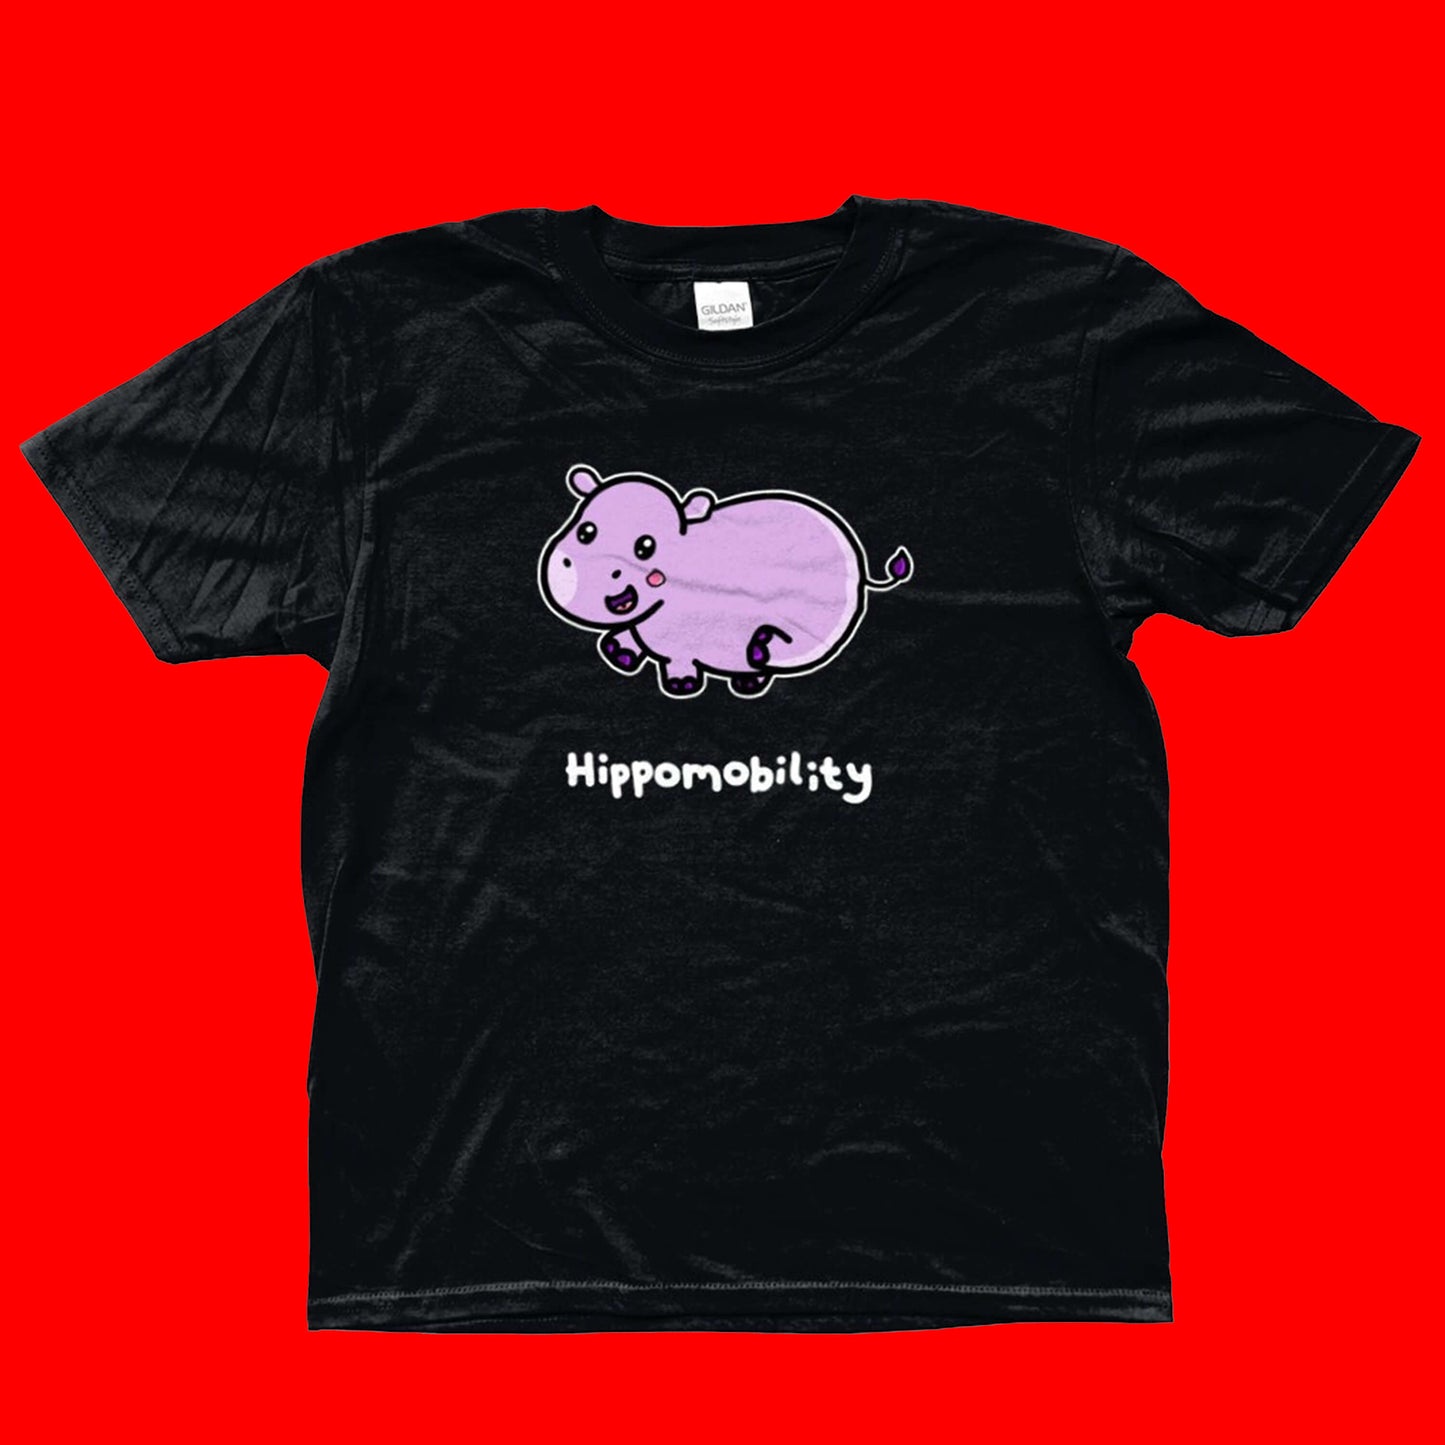 Hippomobility - Hyper Mobility Kids Tee shown on a red background. The black t-shirt has an illustration of a pink happy hippo with 'hippomobility' in white text underneath. The hand drawn design is made to raise awareness for hyper mobility.